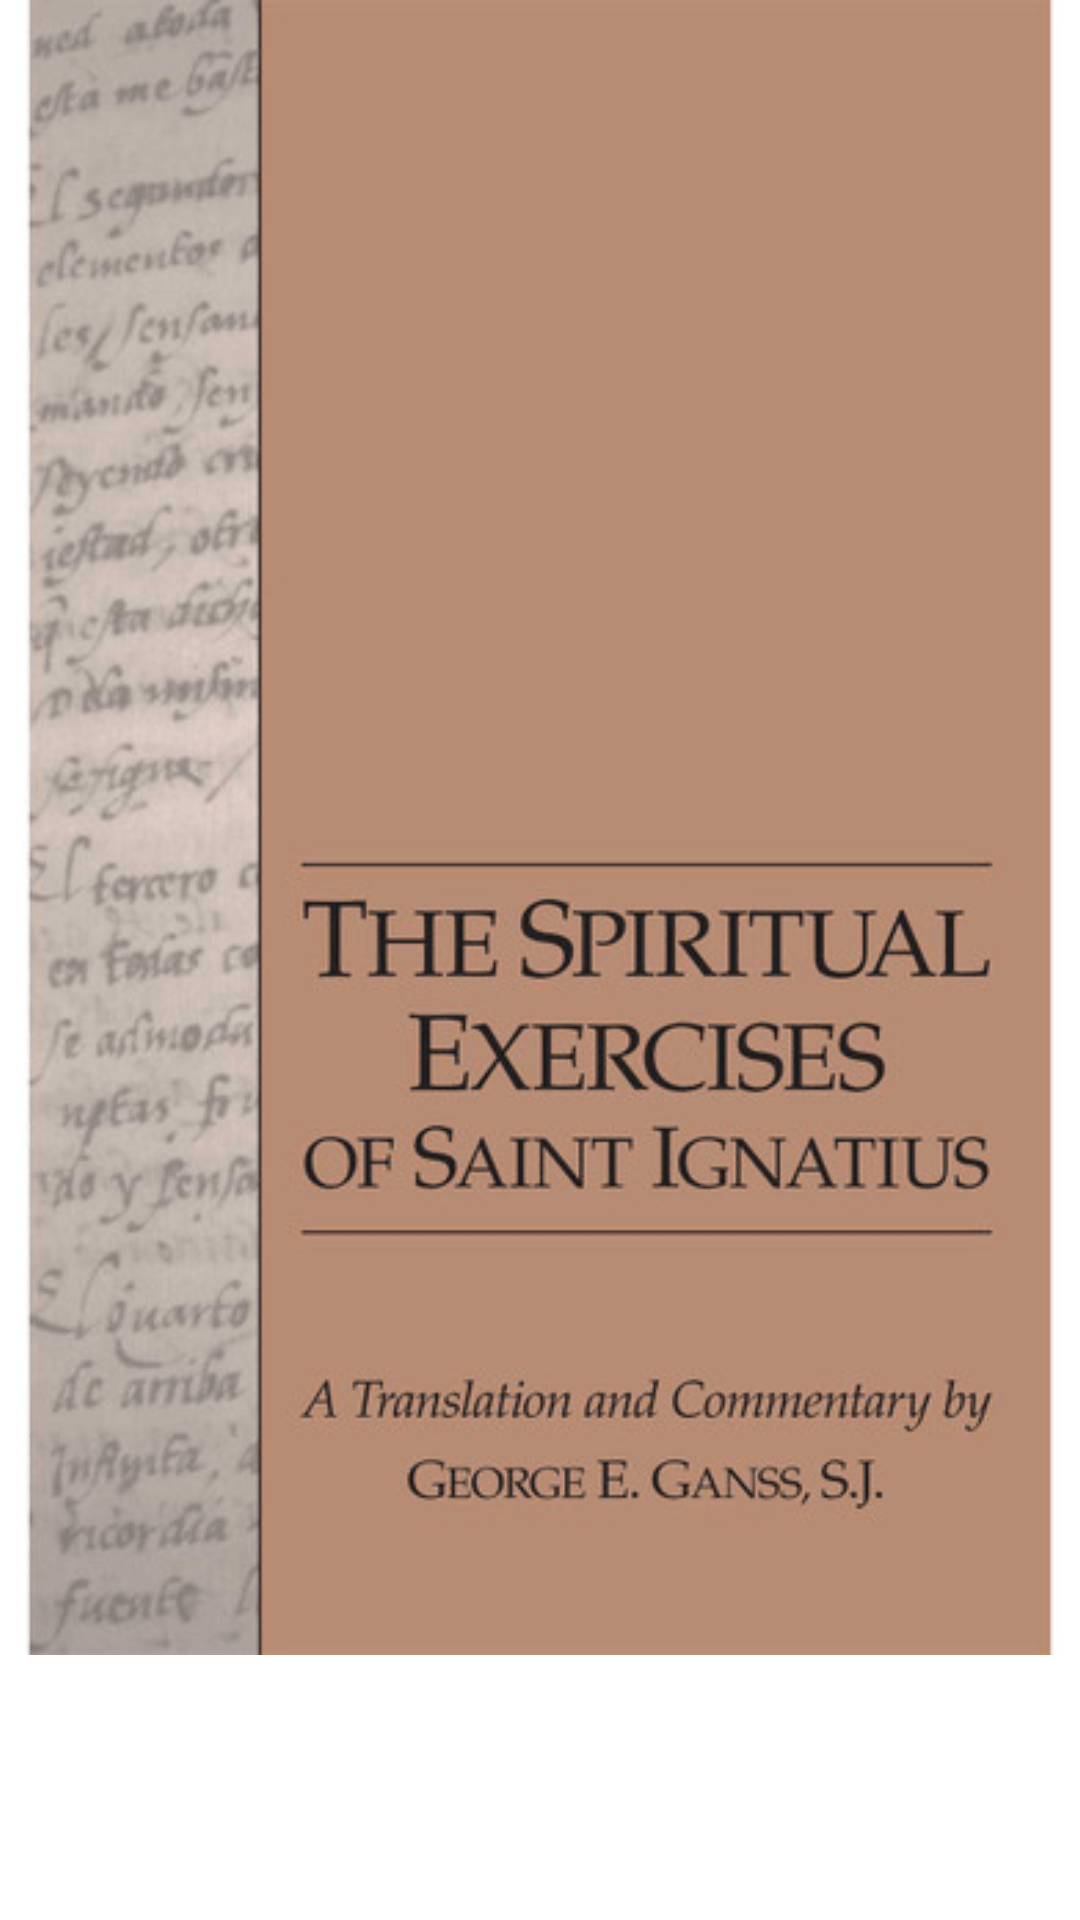 The Spiritual Exercises of Saint Ignatius: A Translation and Commentary